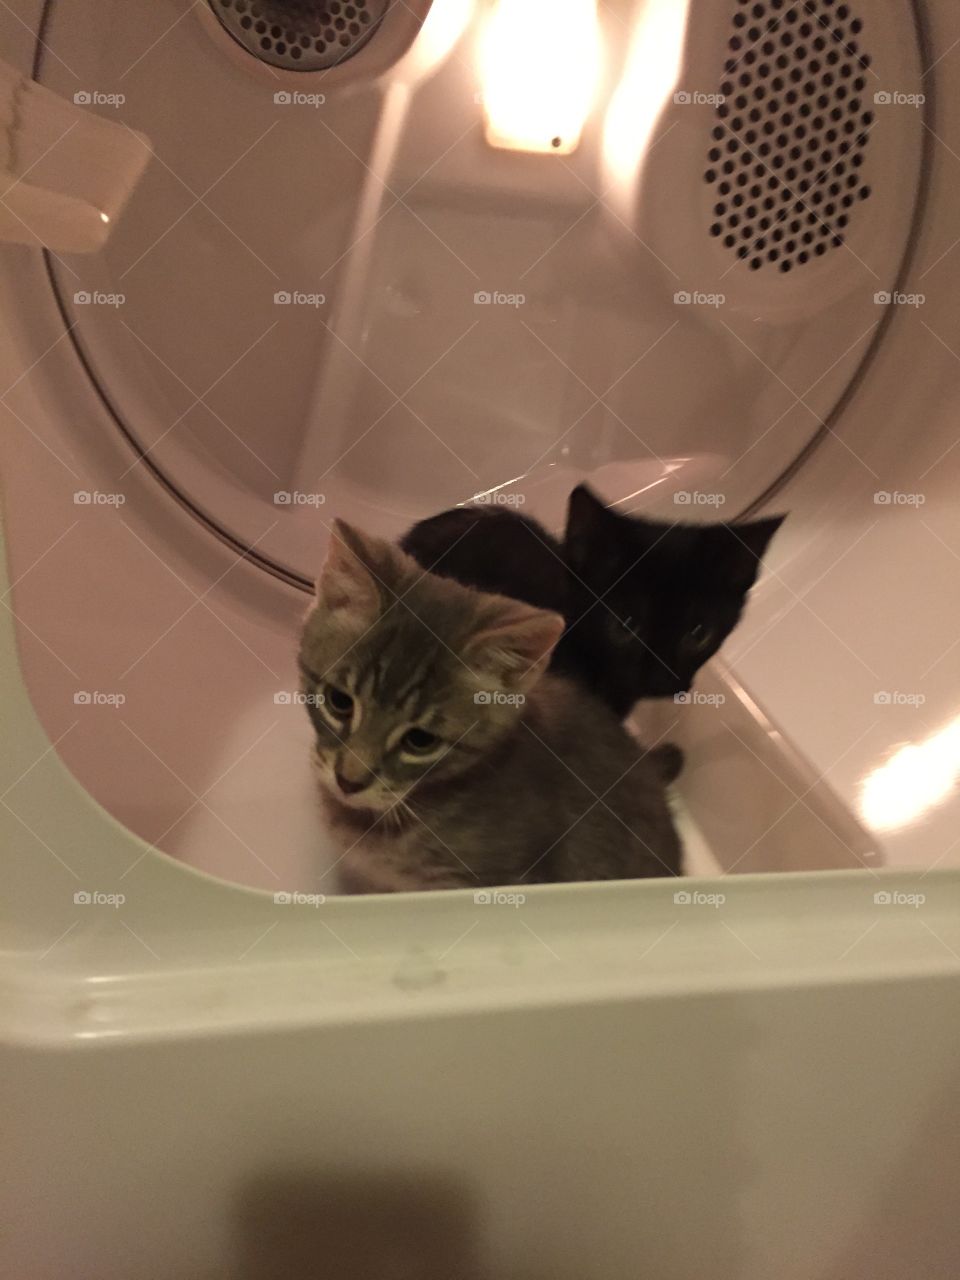 Flashback to when my kitties were just babies and were curious about the dryer 